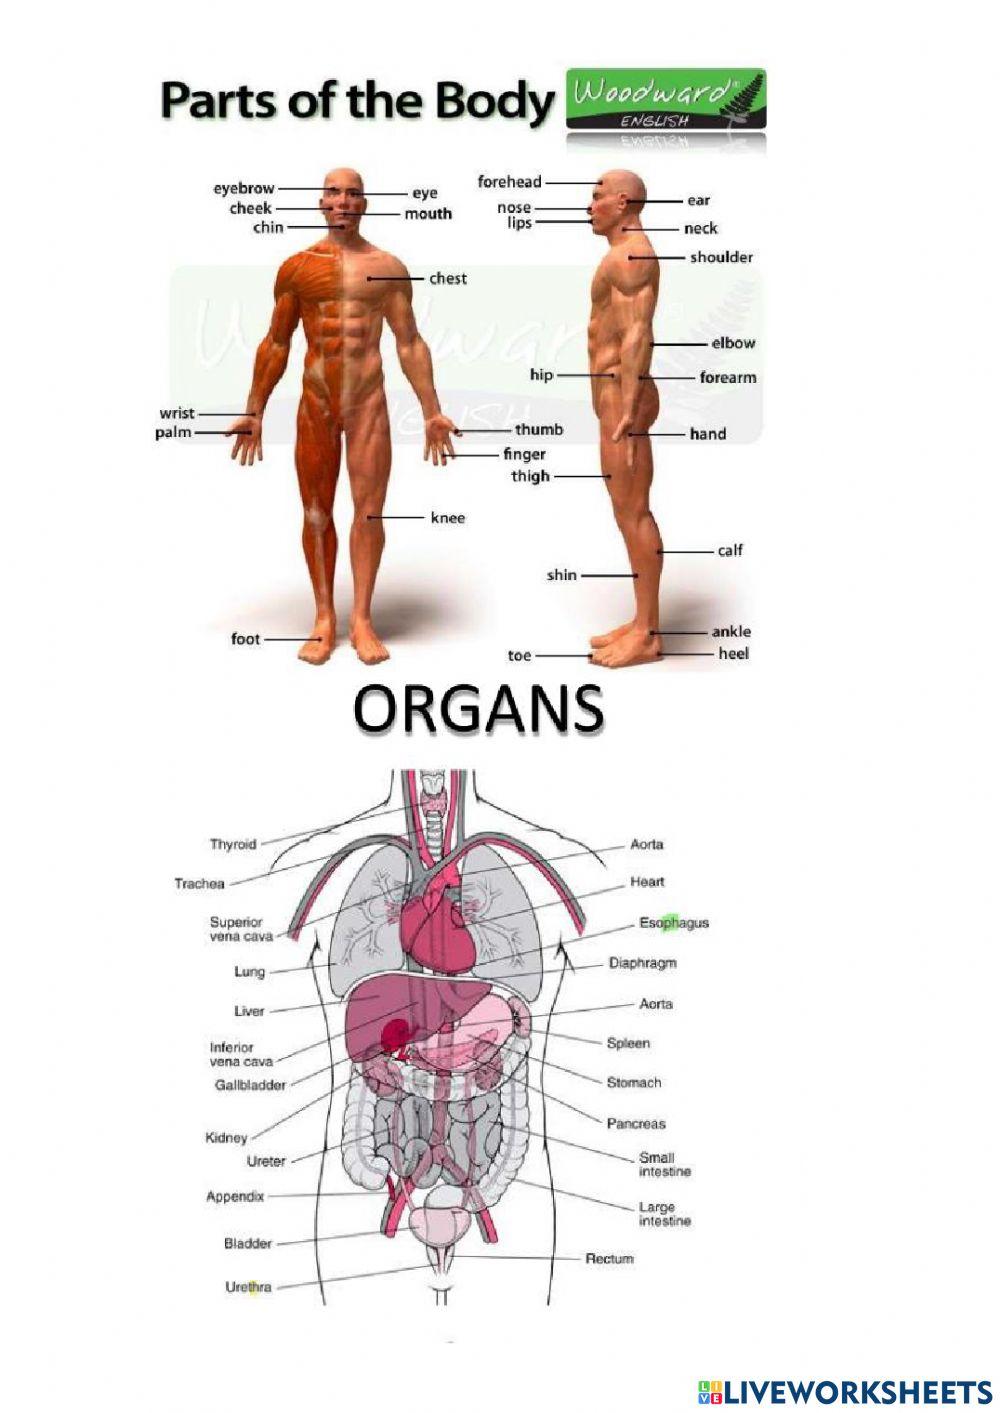 Body parts and organs